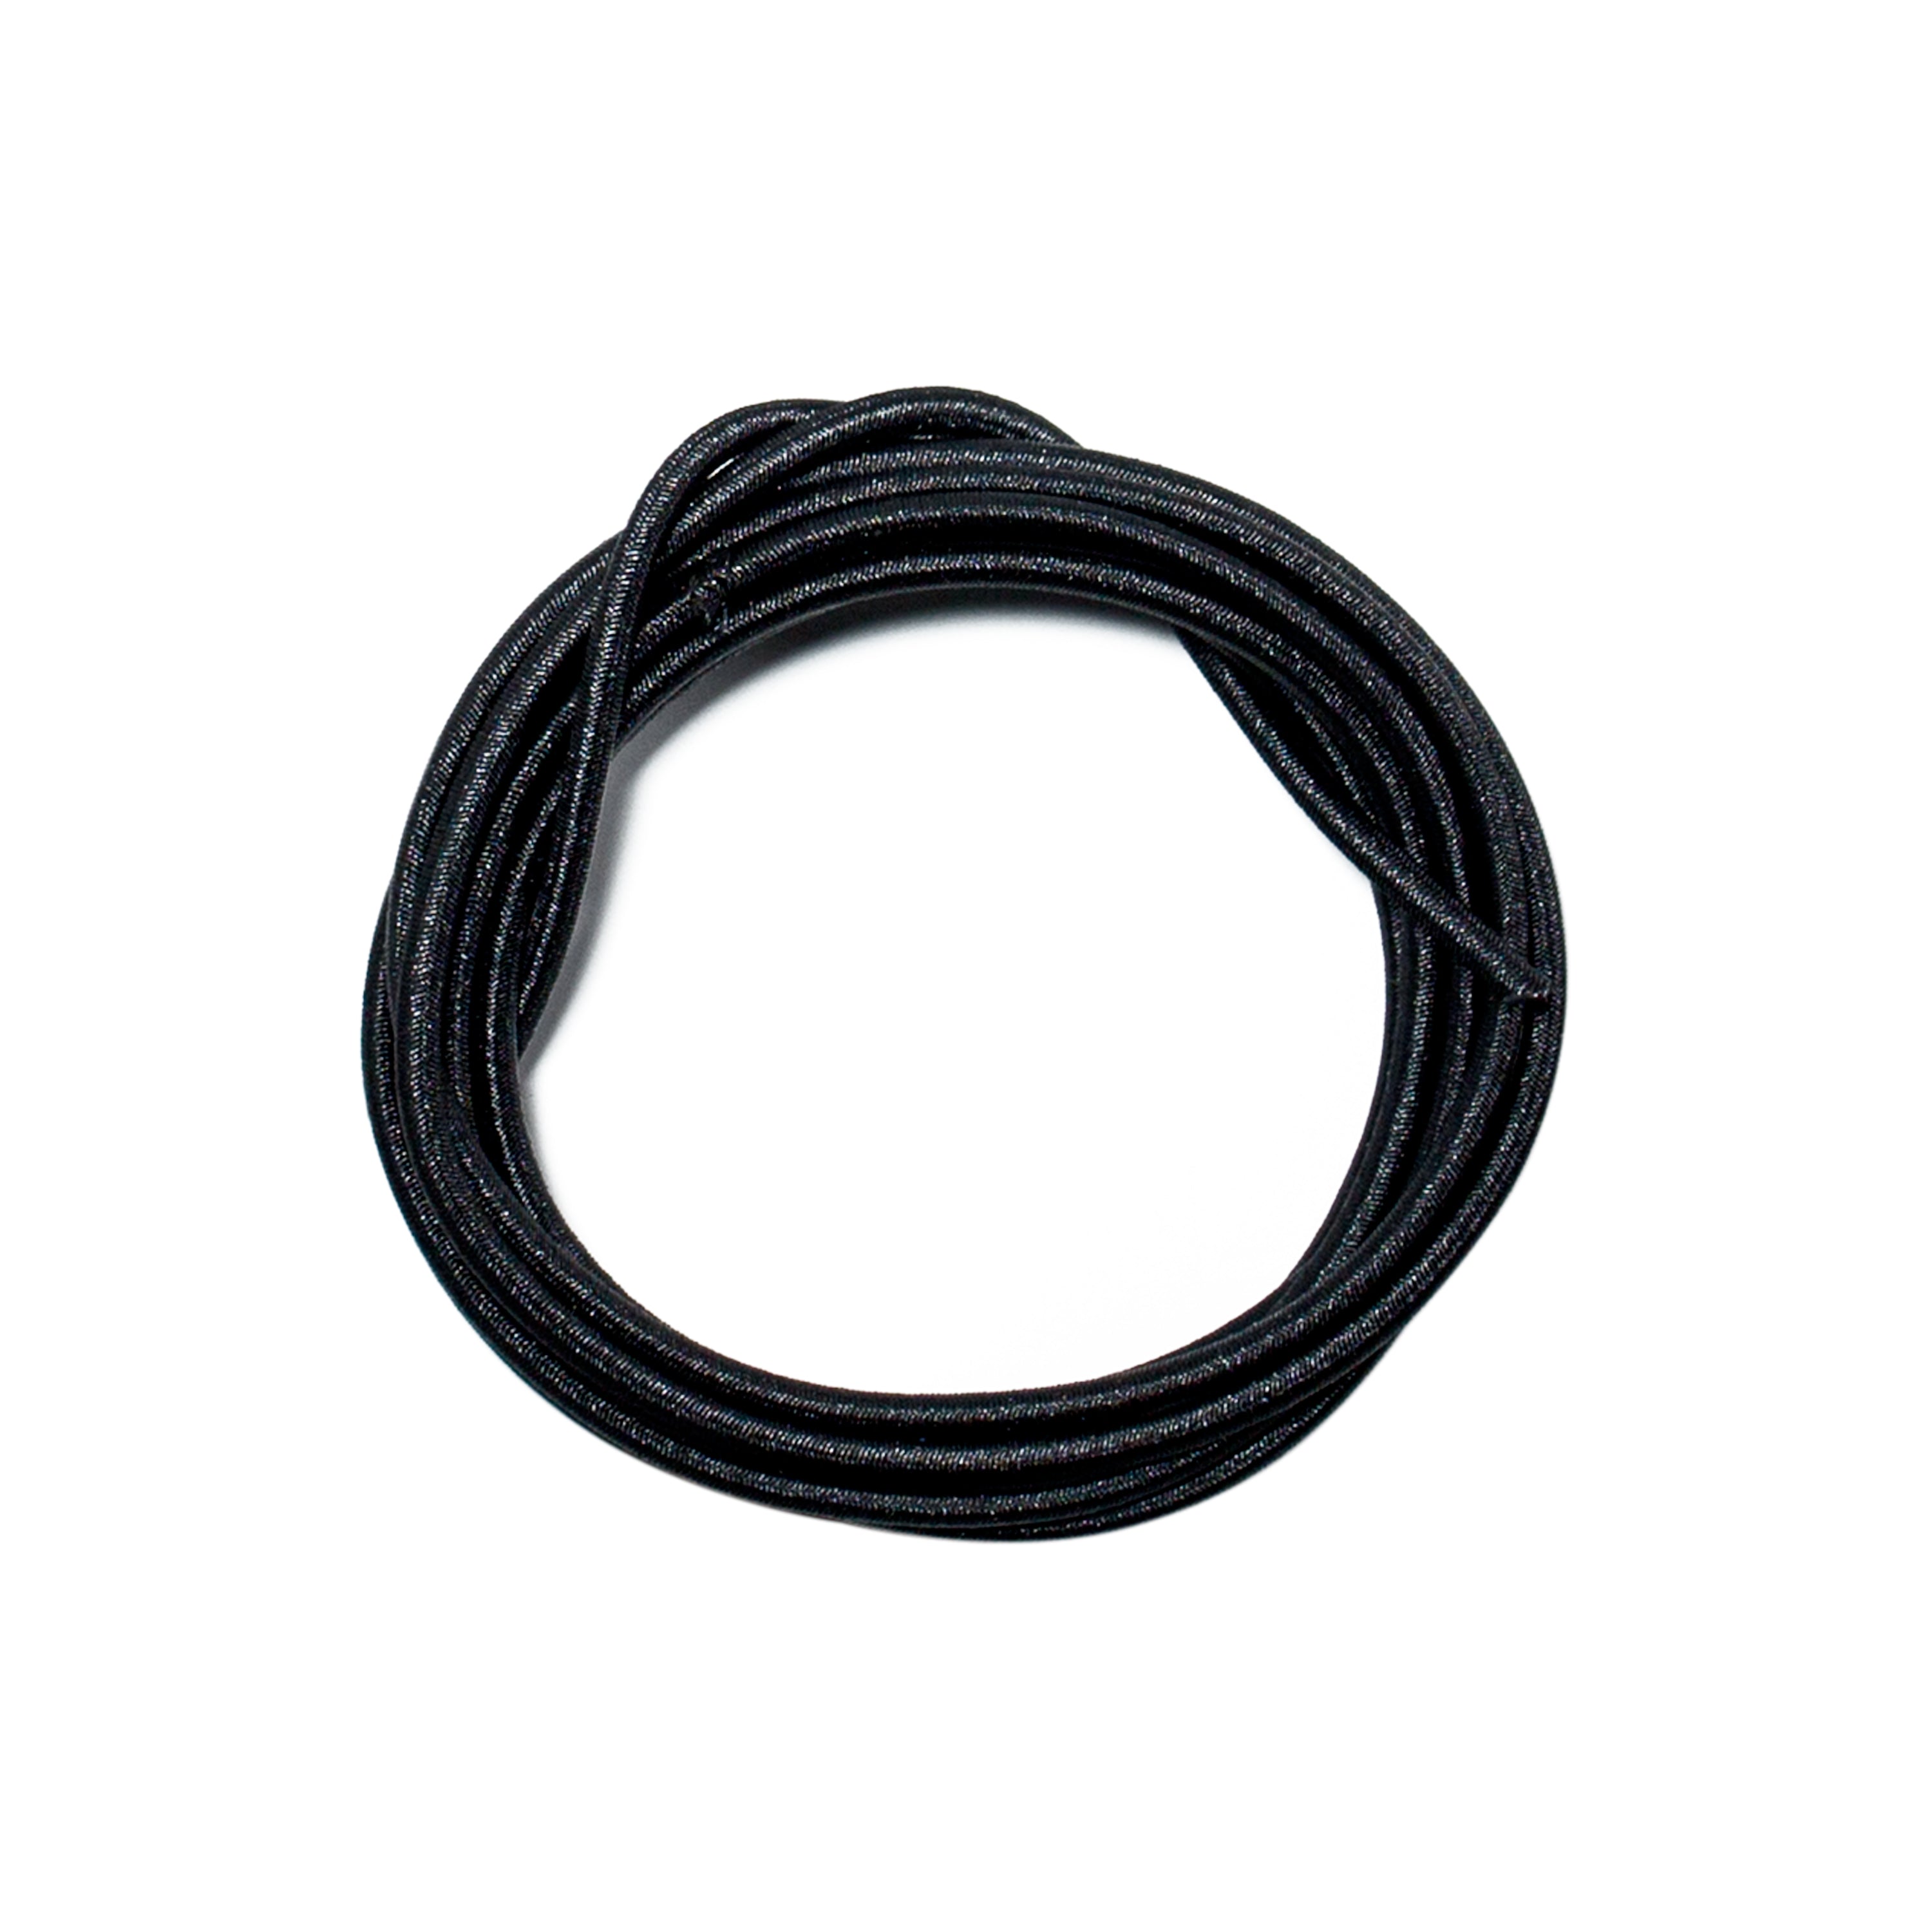  Leather Cord